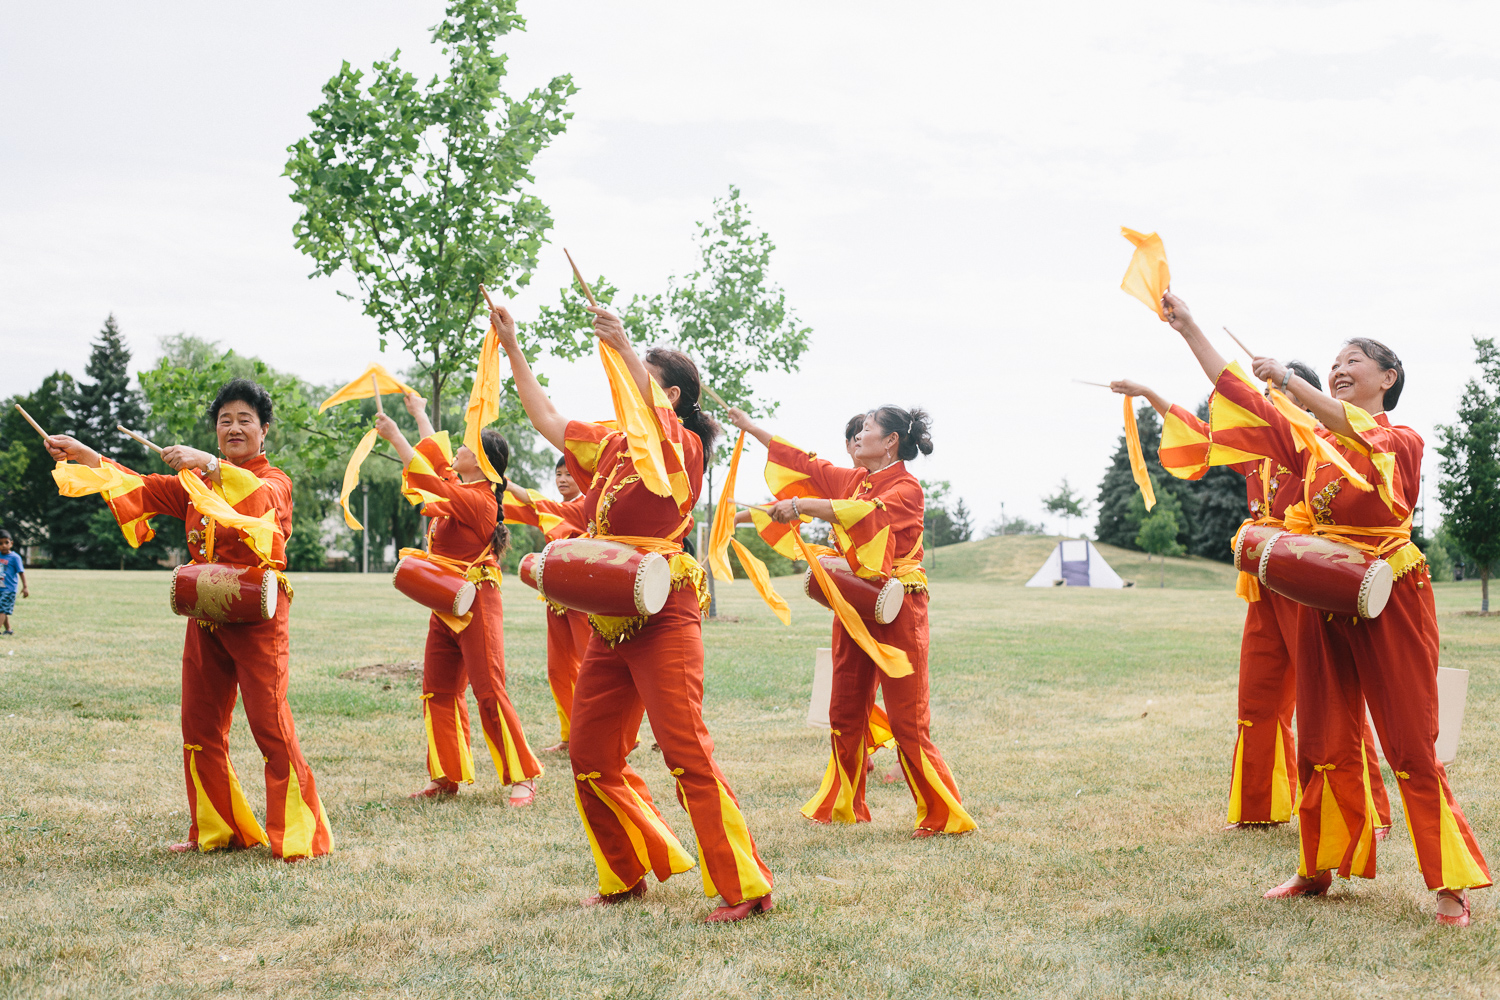 A group of women dancers in yellow and red costumes carry drums as they move across a field.